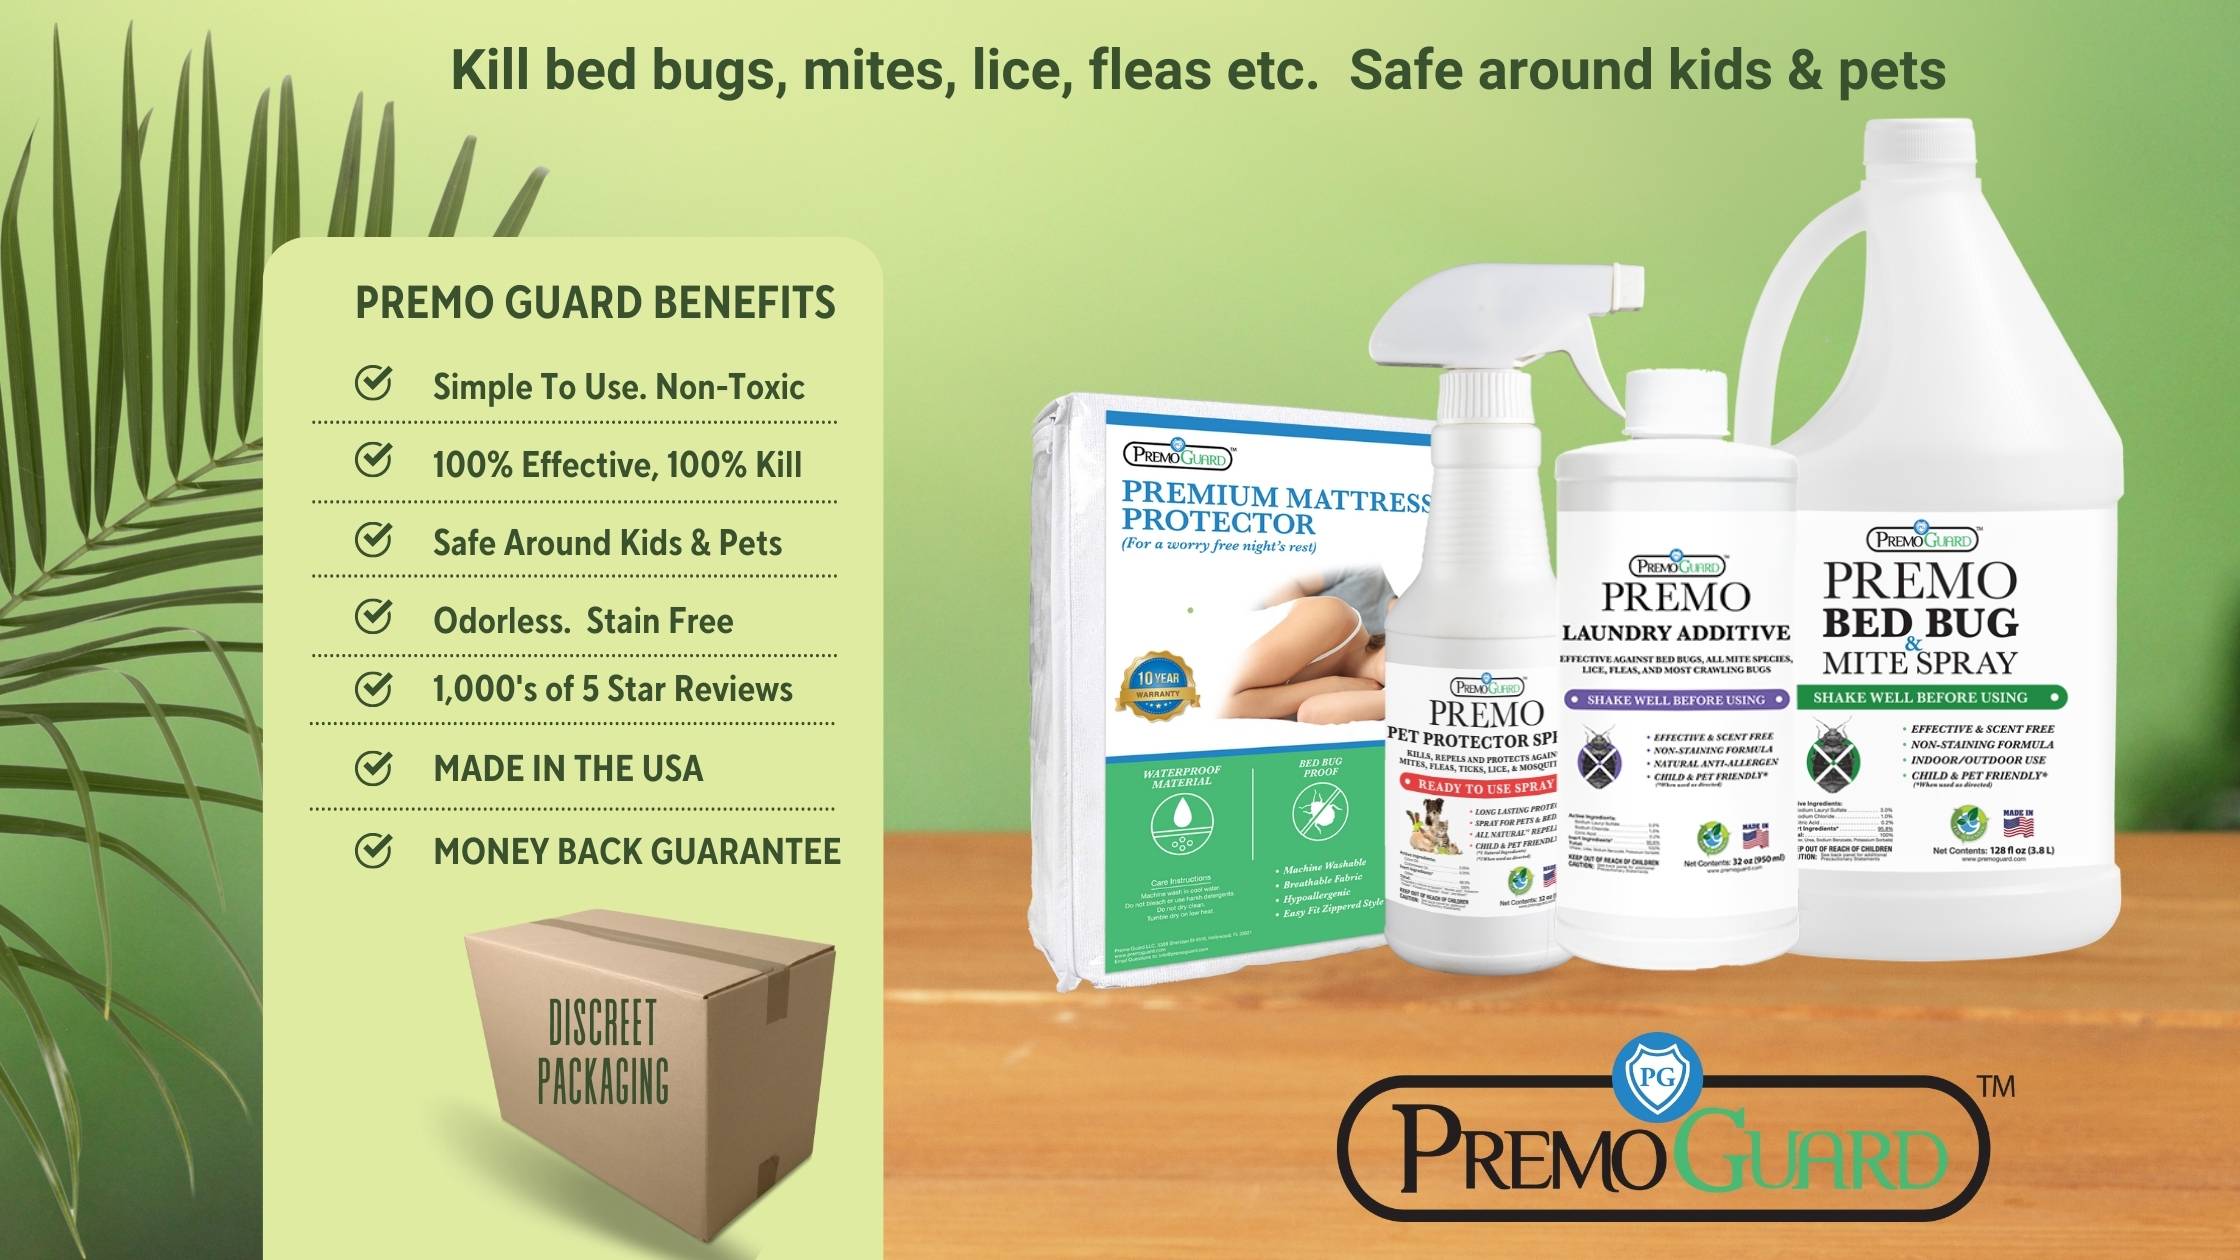 Premo Guard Kills Crawling Insects, bed bugs, mites, lice, fleas and more.